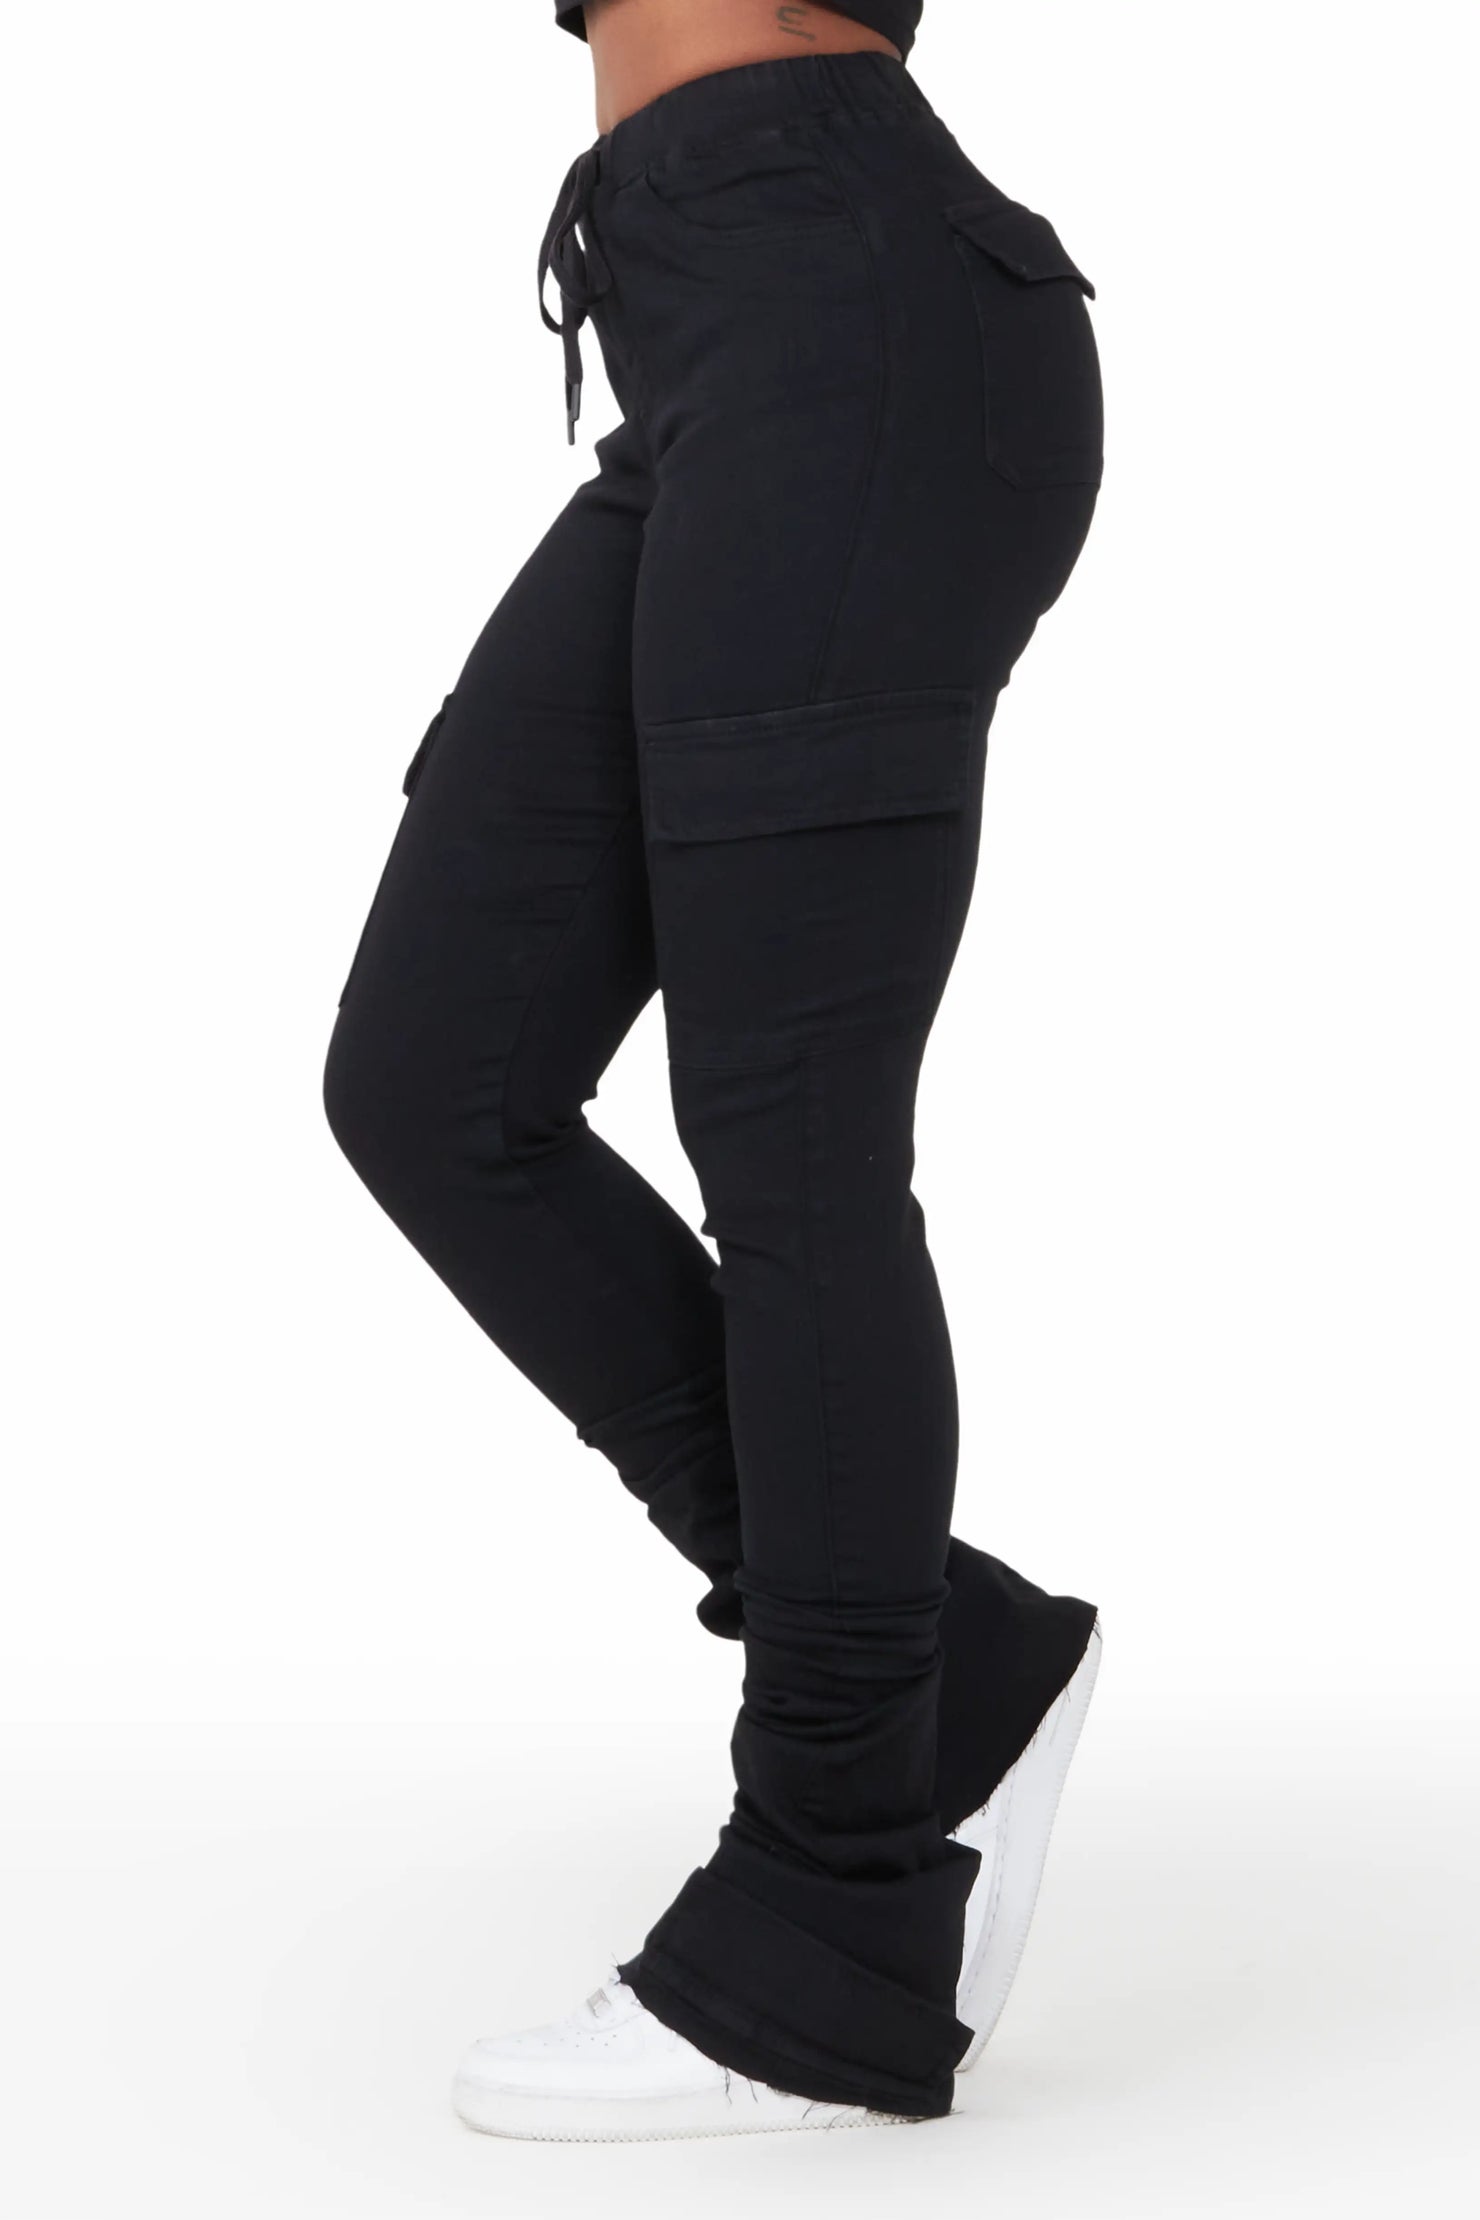 Evey Black Super Stacked Jean